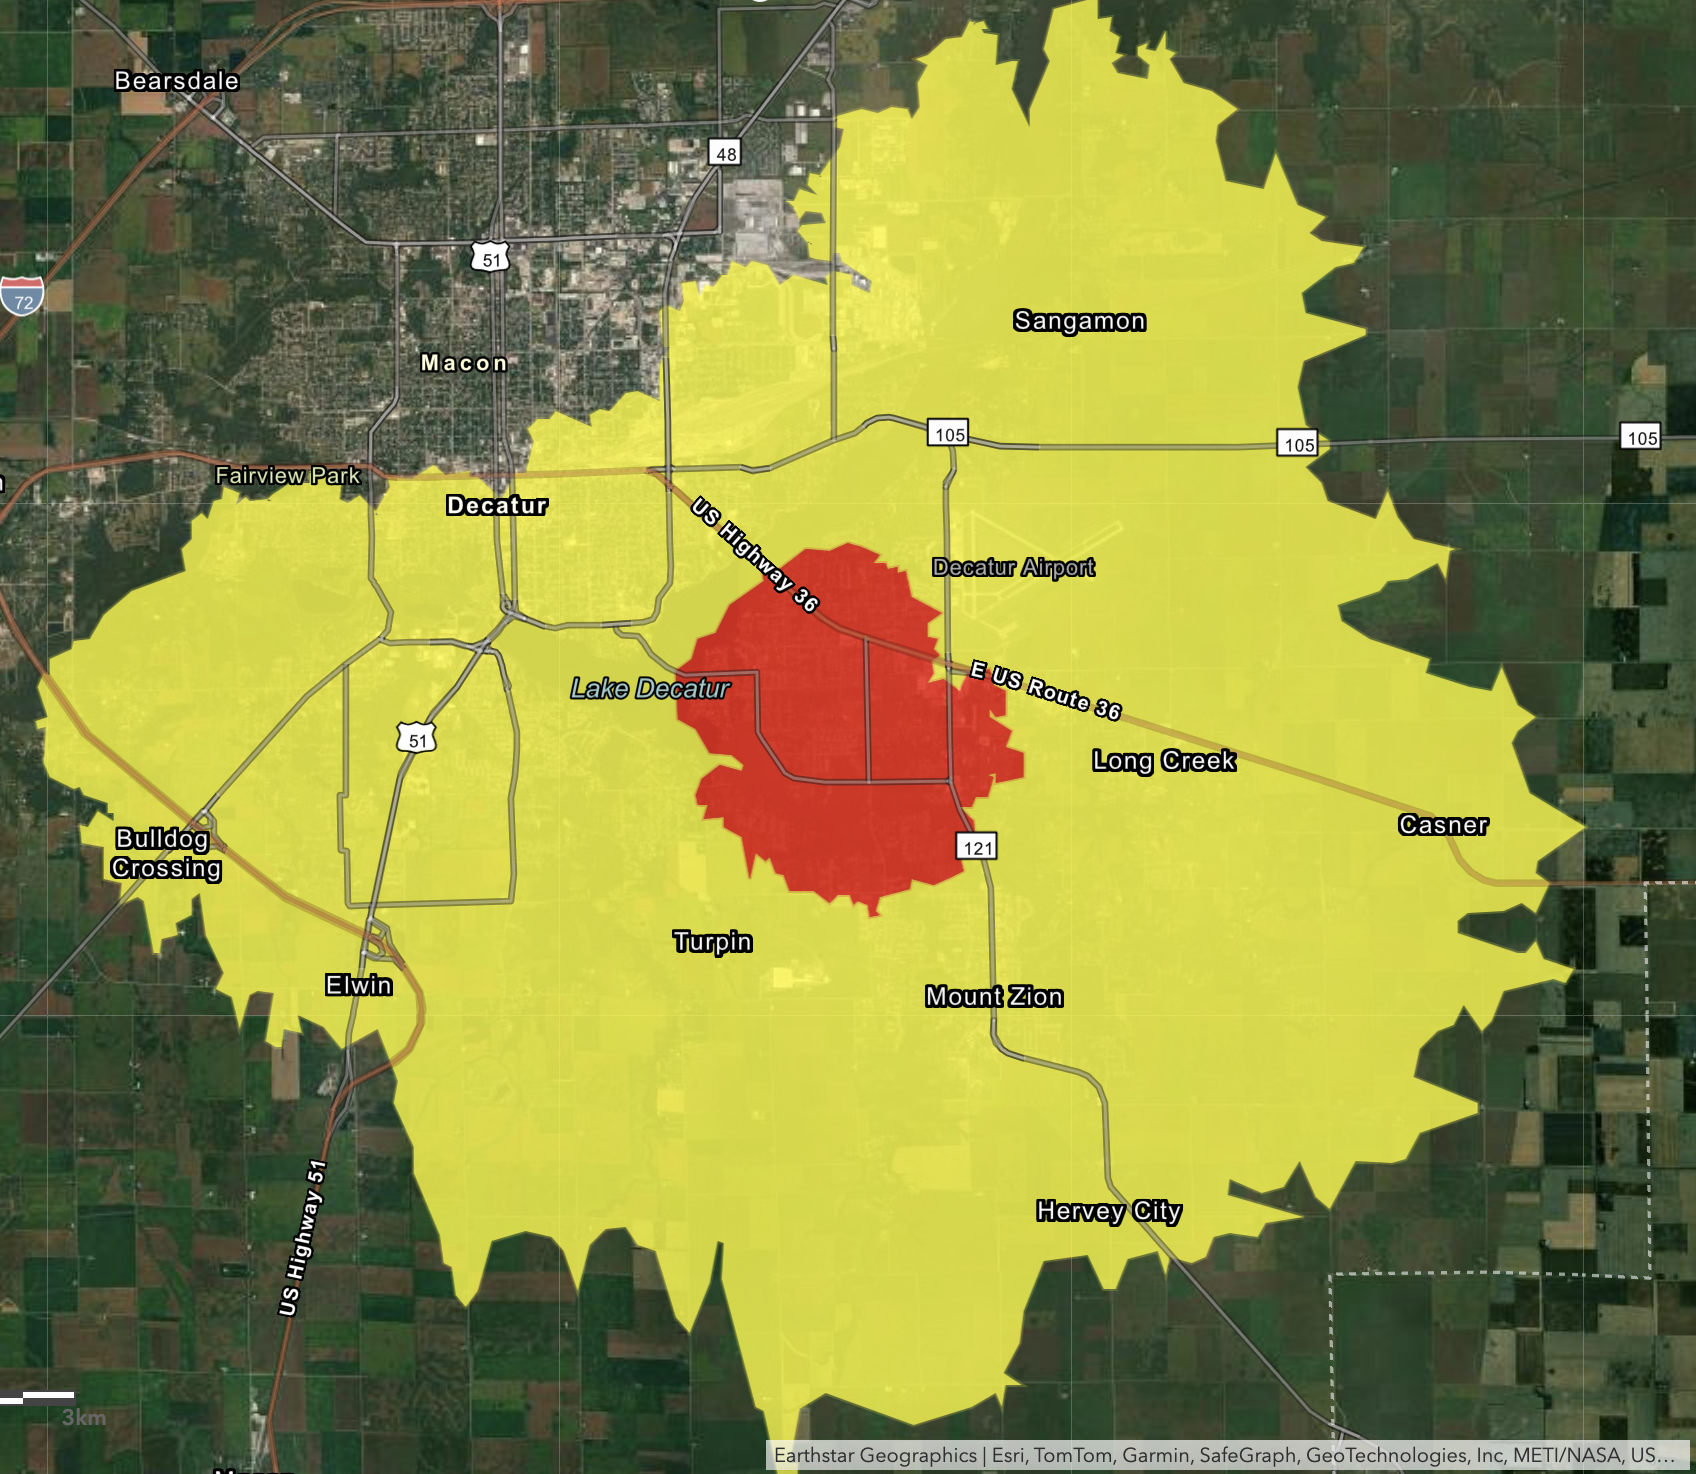 A map of the bee's habitat in Decatur, Illinois